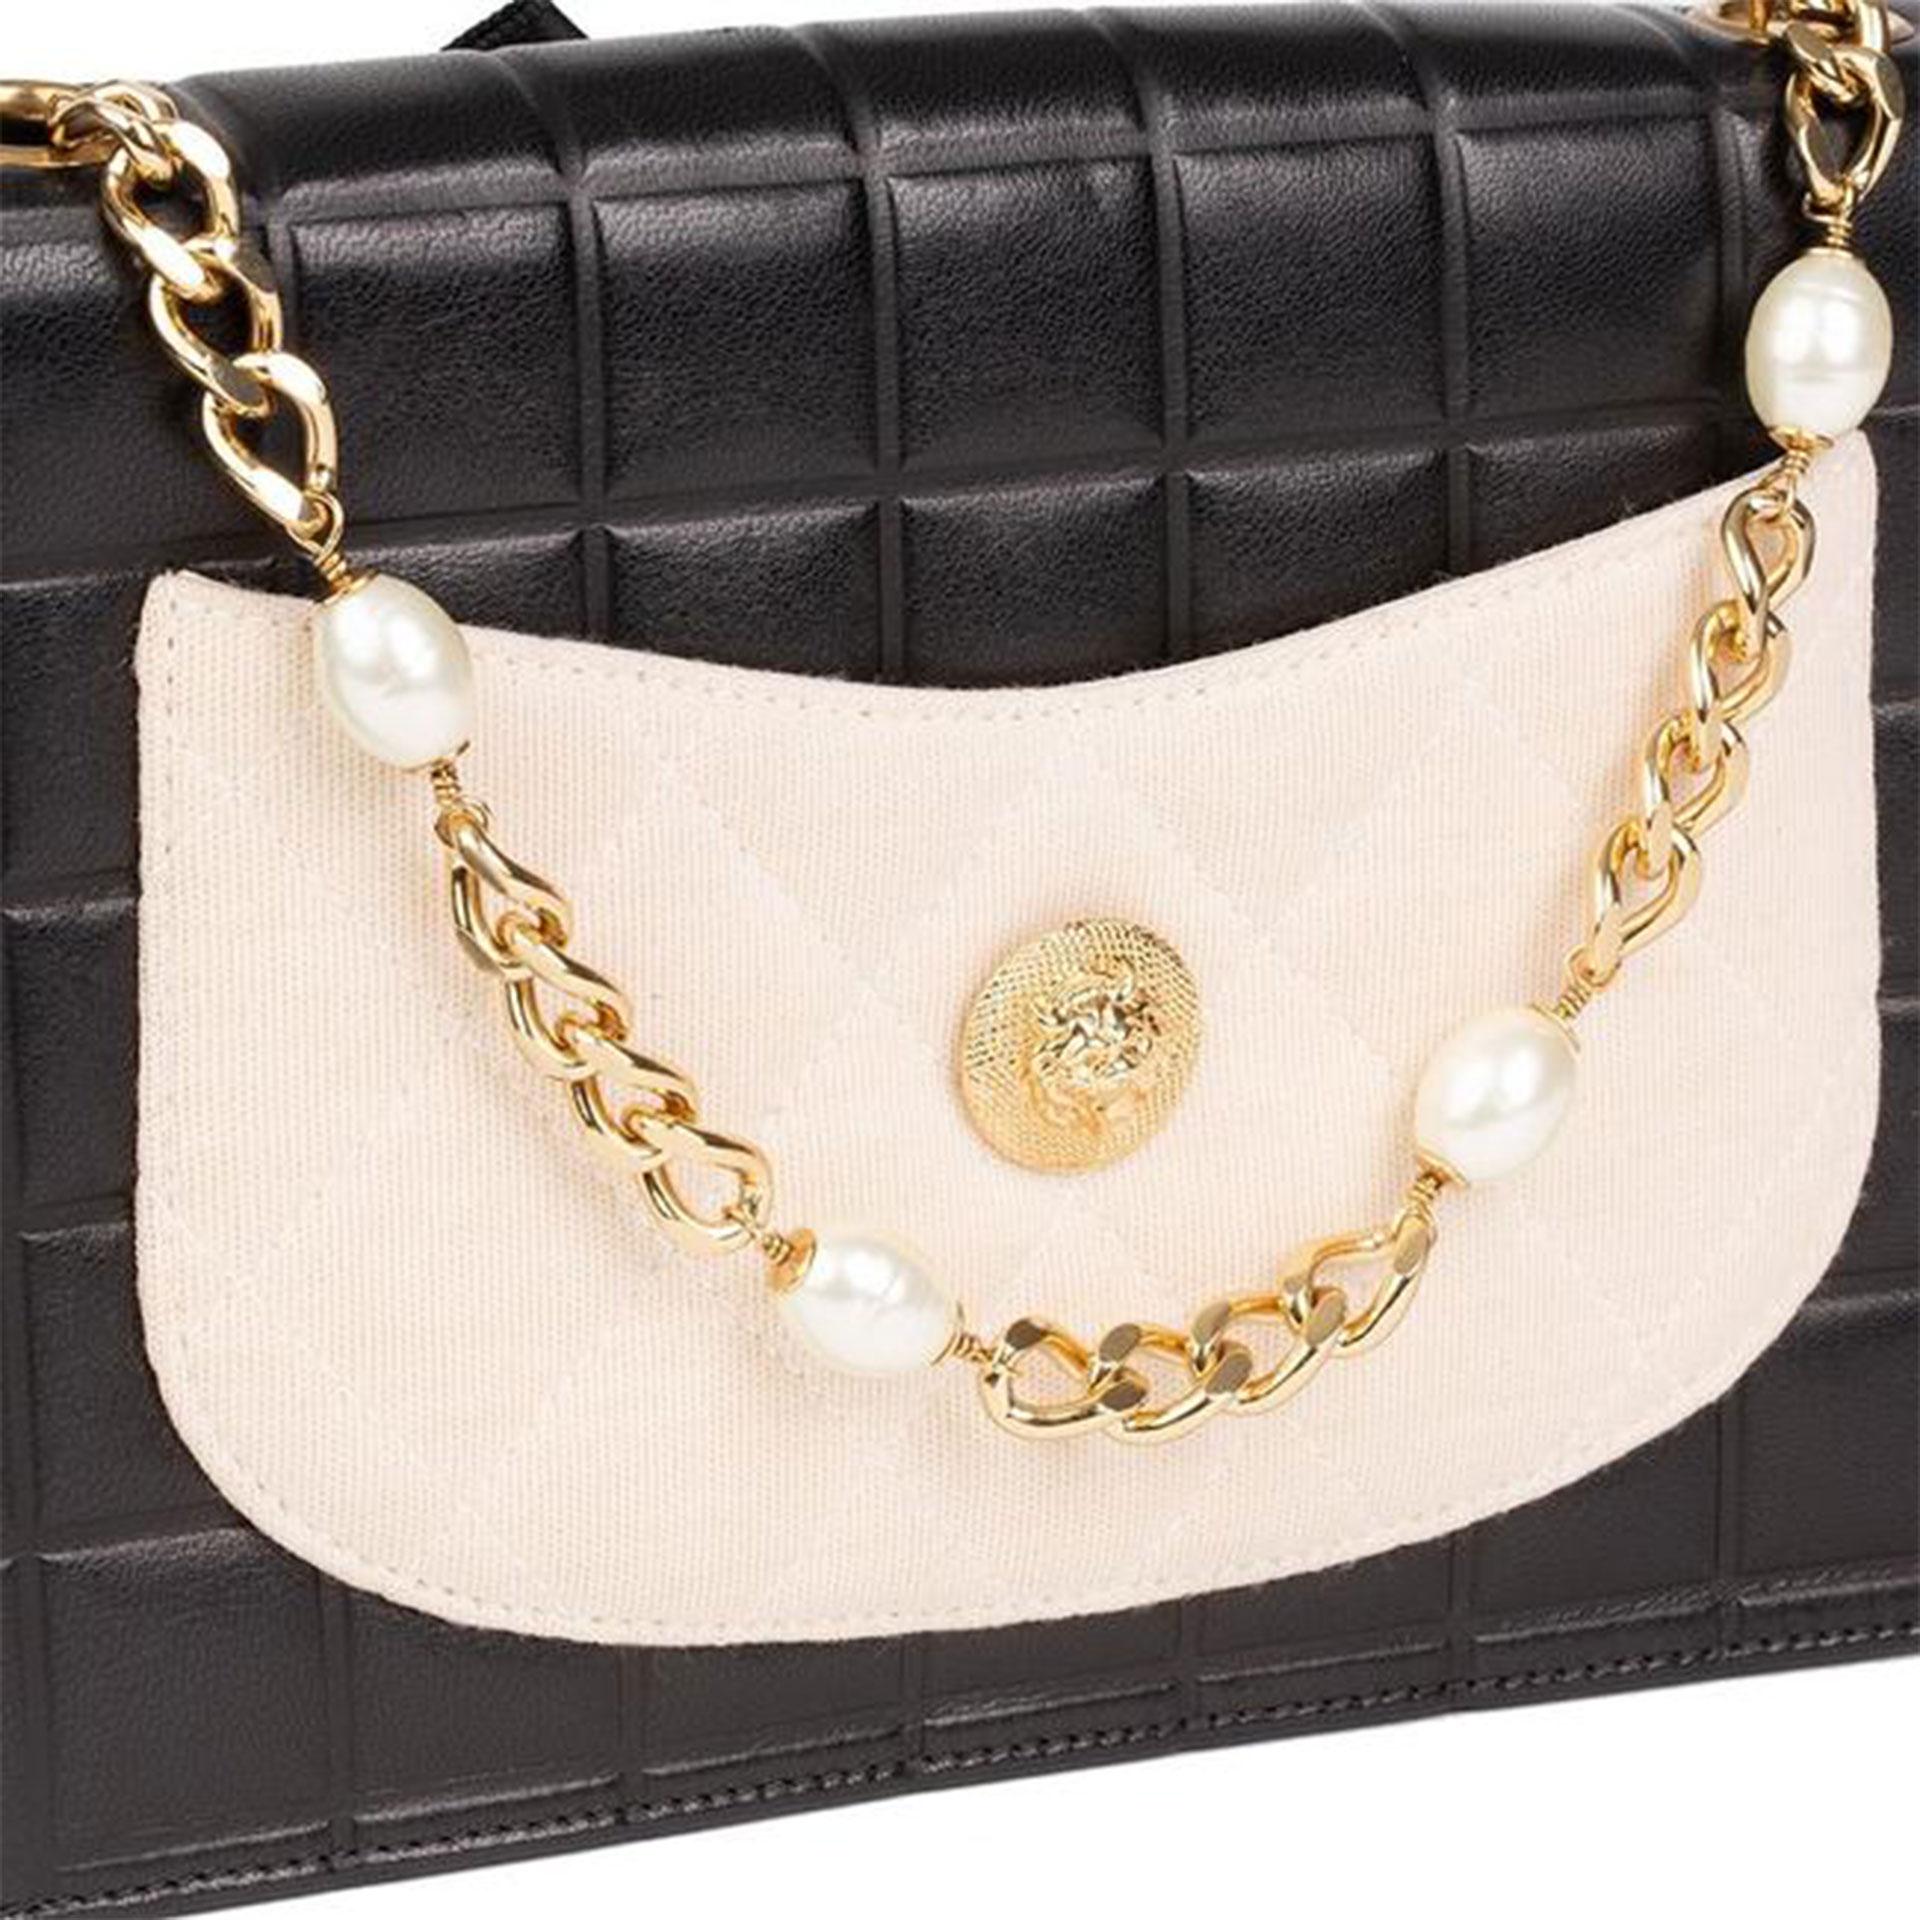 Chanel Chain Rare Vintage 90's Freshwater Pearl Black White Tweed Lambskin Bag In Good Condition For Sale In Miami, FL